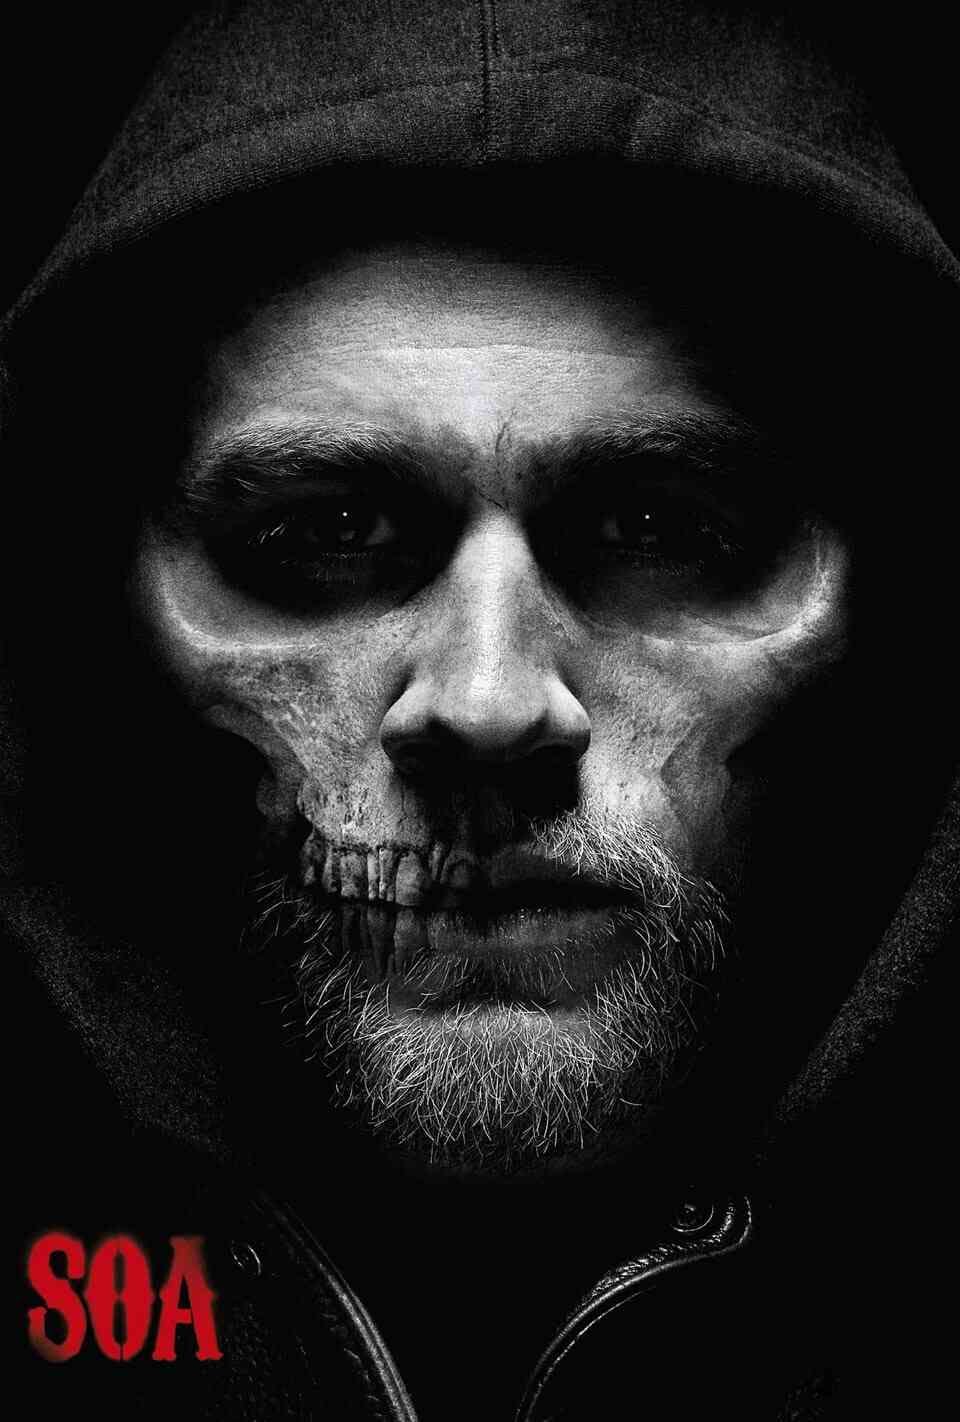 Read Sons of Anarchy screenplay (poster)